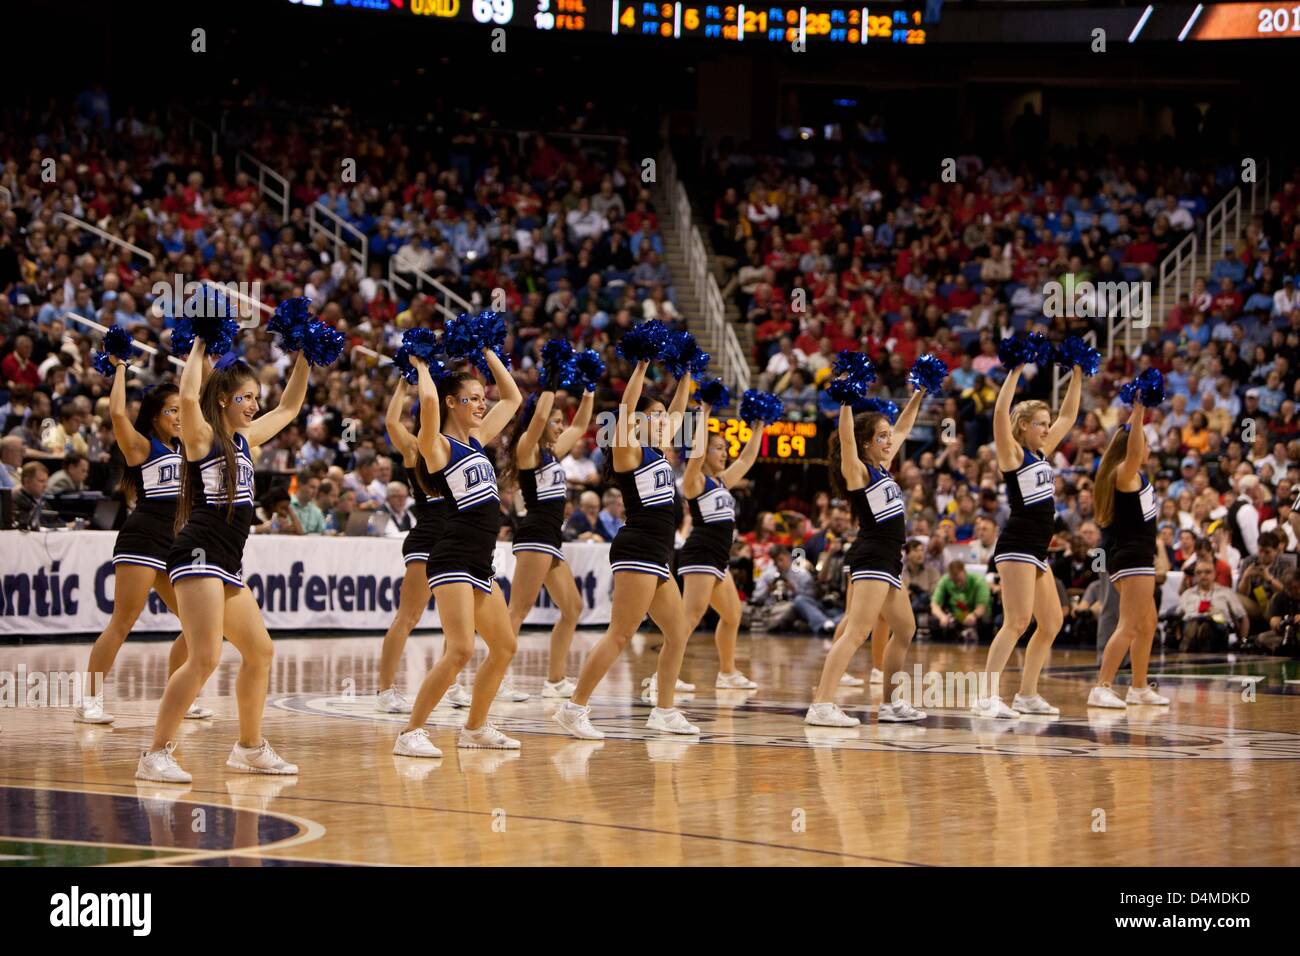 March 15, 2013 - Greensboro, North Carolina, United States of America - March 15, 2013: Duke cheerleaders on the court during the Maryland vs Duke game at the 2013 ACC men's basketball tournament in Greensboro, NC at the Greensboro Coliseum on March 15, 2013. Duke defeated Maryland 83-74. Stock Photo